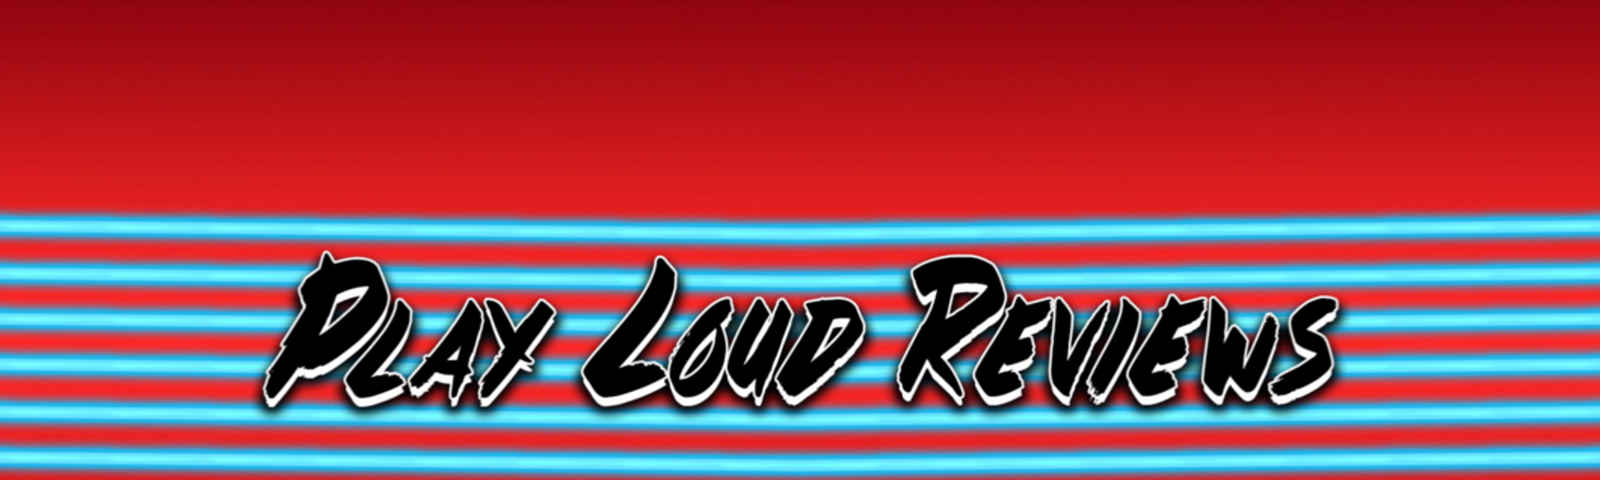 “Play Loud Reviews” in black text with white outlines on top of six glowing electric blue horizontal lines and a gradient scarlet background